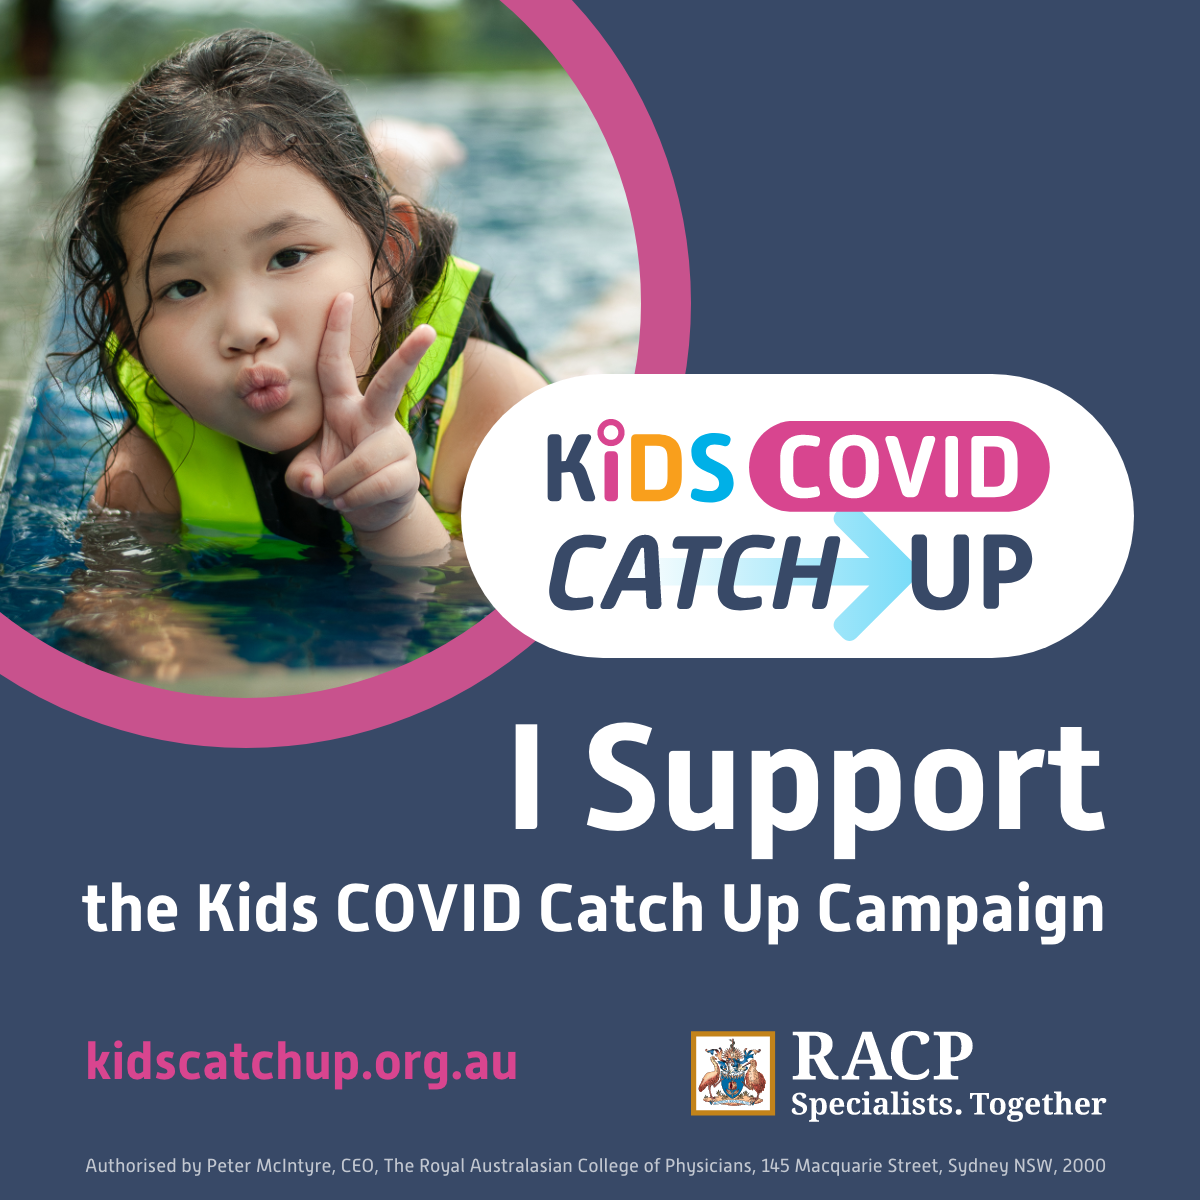 Child in pool - I support Kids Covid catch up campaign